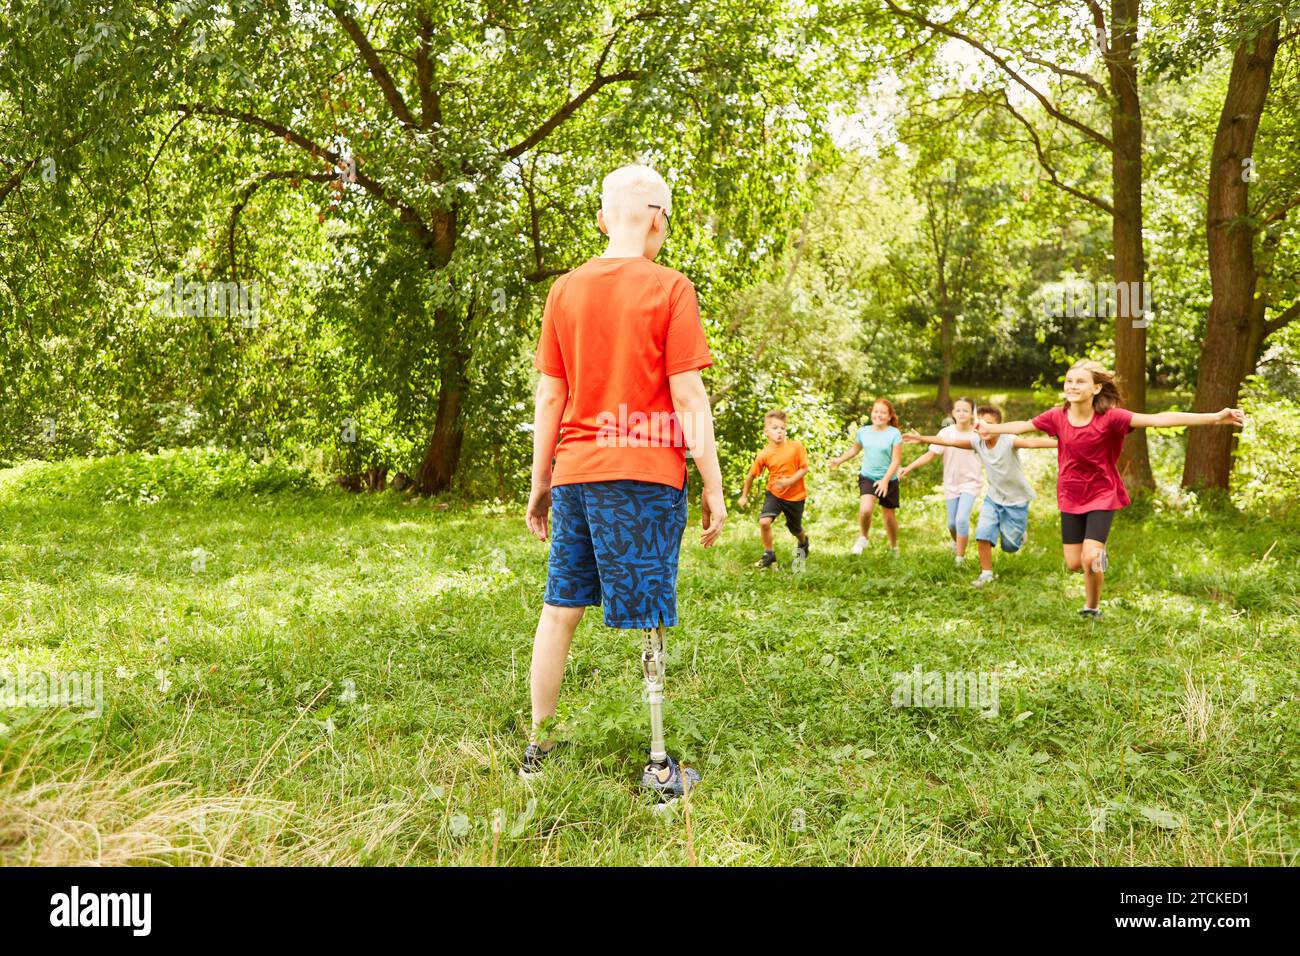 Happy kids running towards disabled male friend standing on grass at park Stock Photo